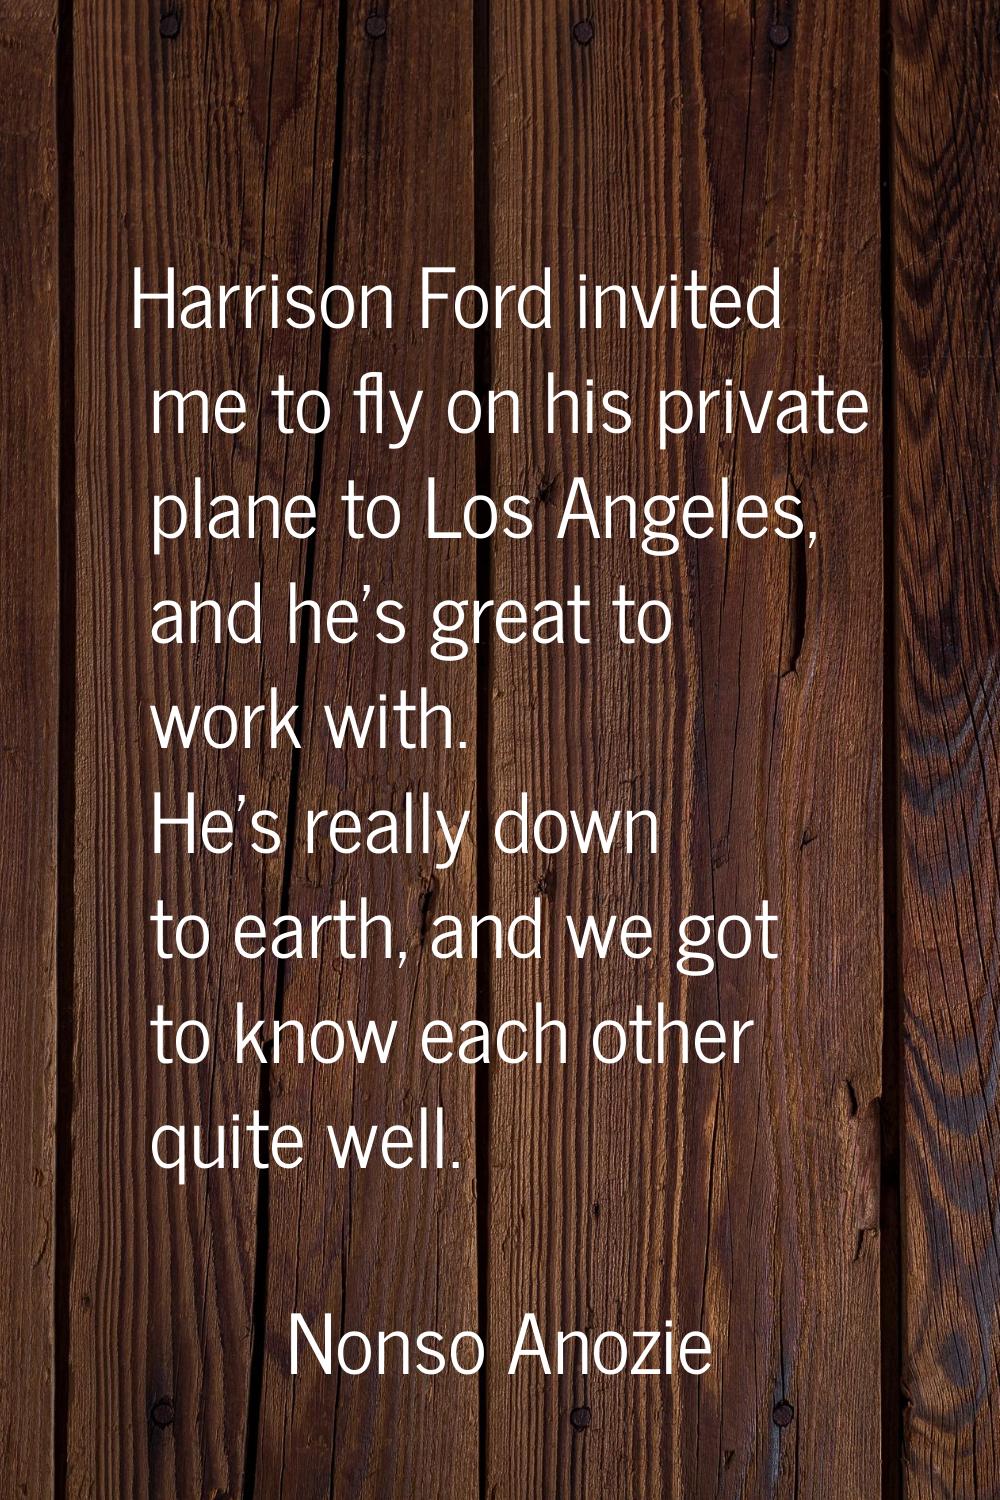 Harrison Ford invited me to fly on his private plane to Los Angeles, and he's great to work with. H